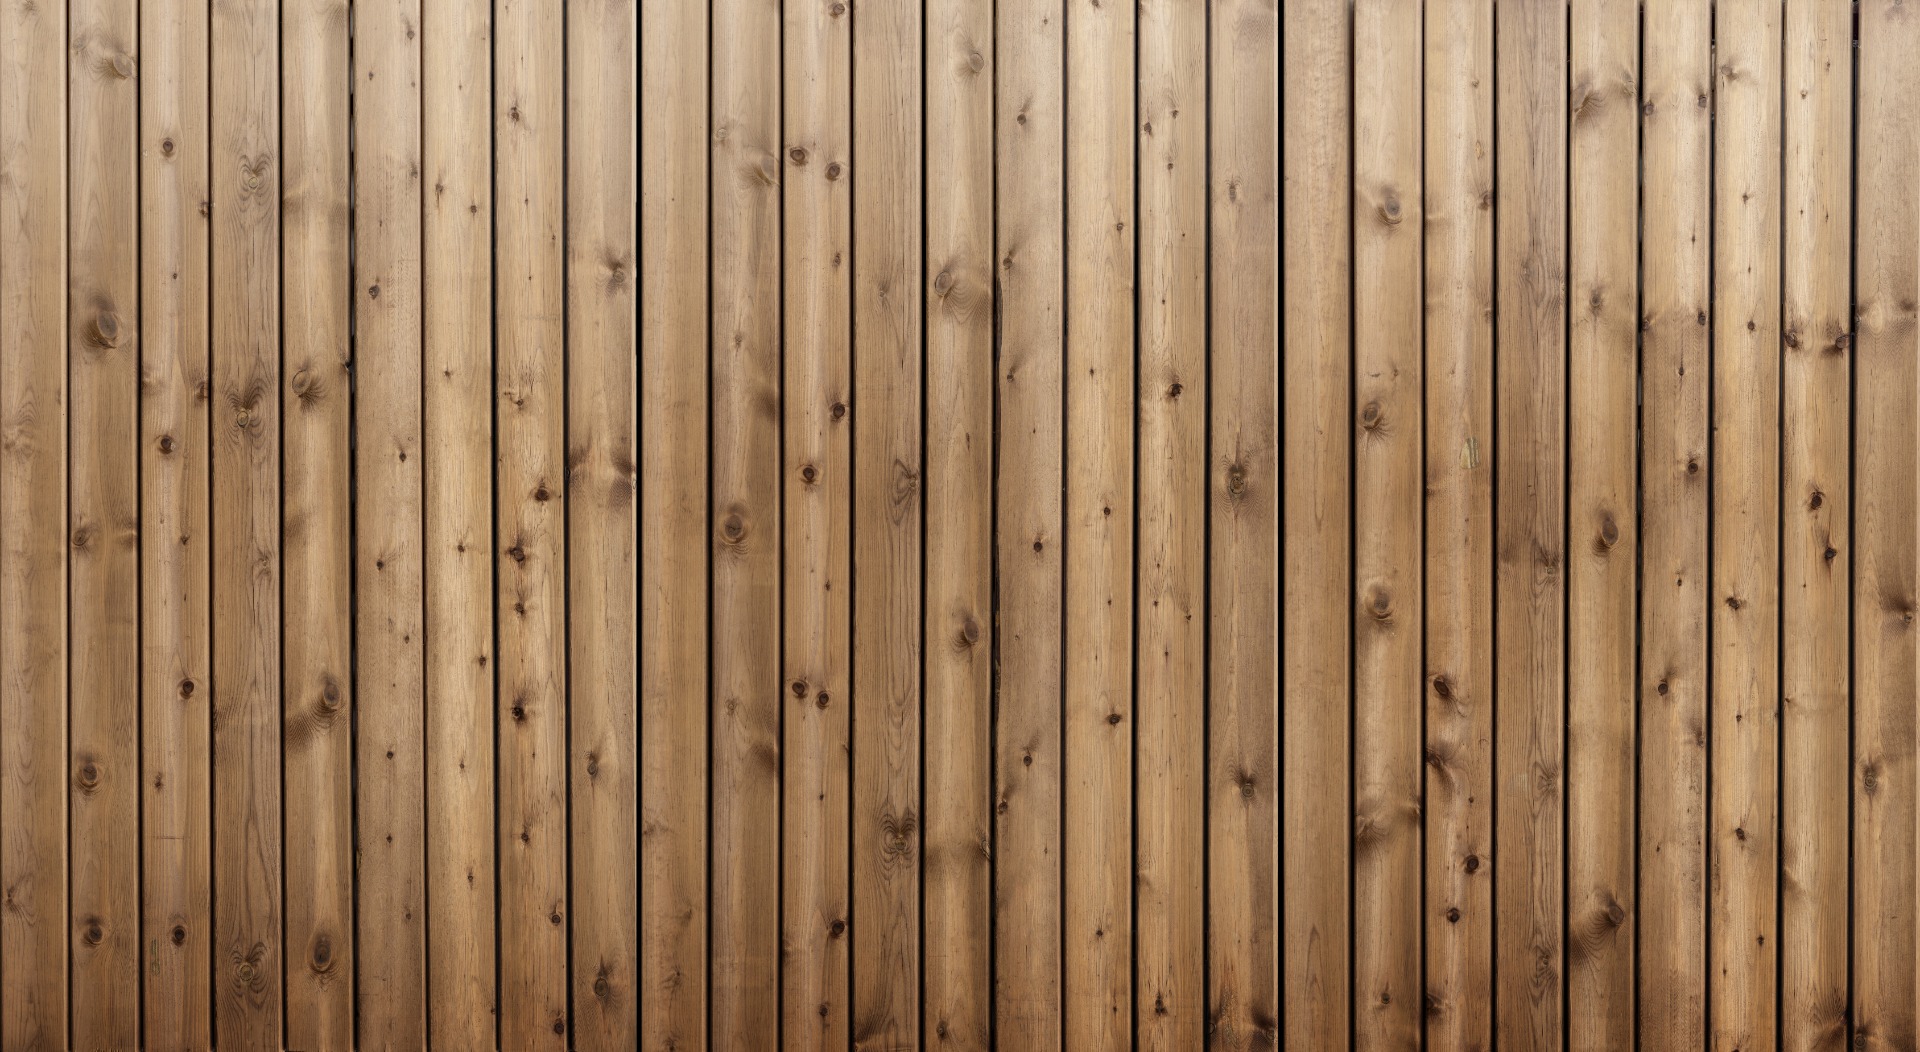 2,000+ Free Wooden Wall & Wood Images - Pixabay